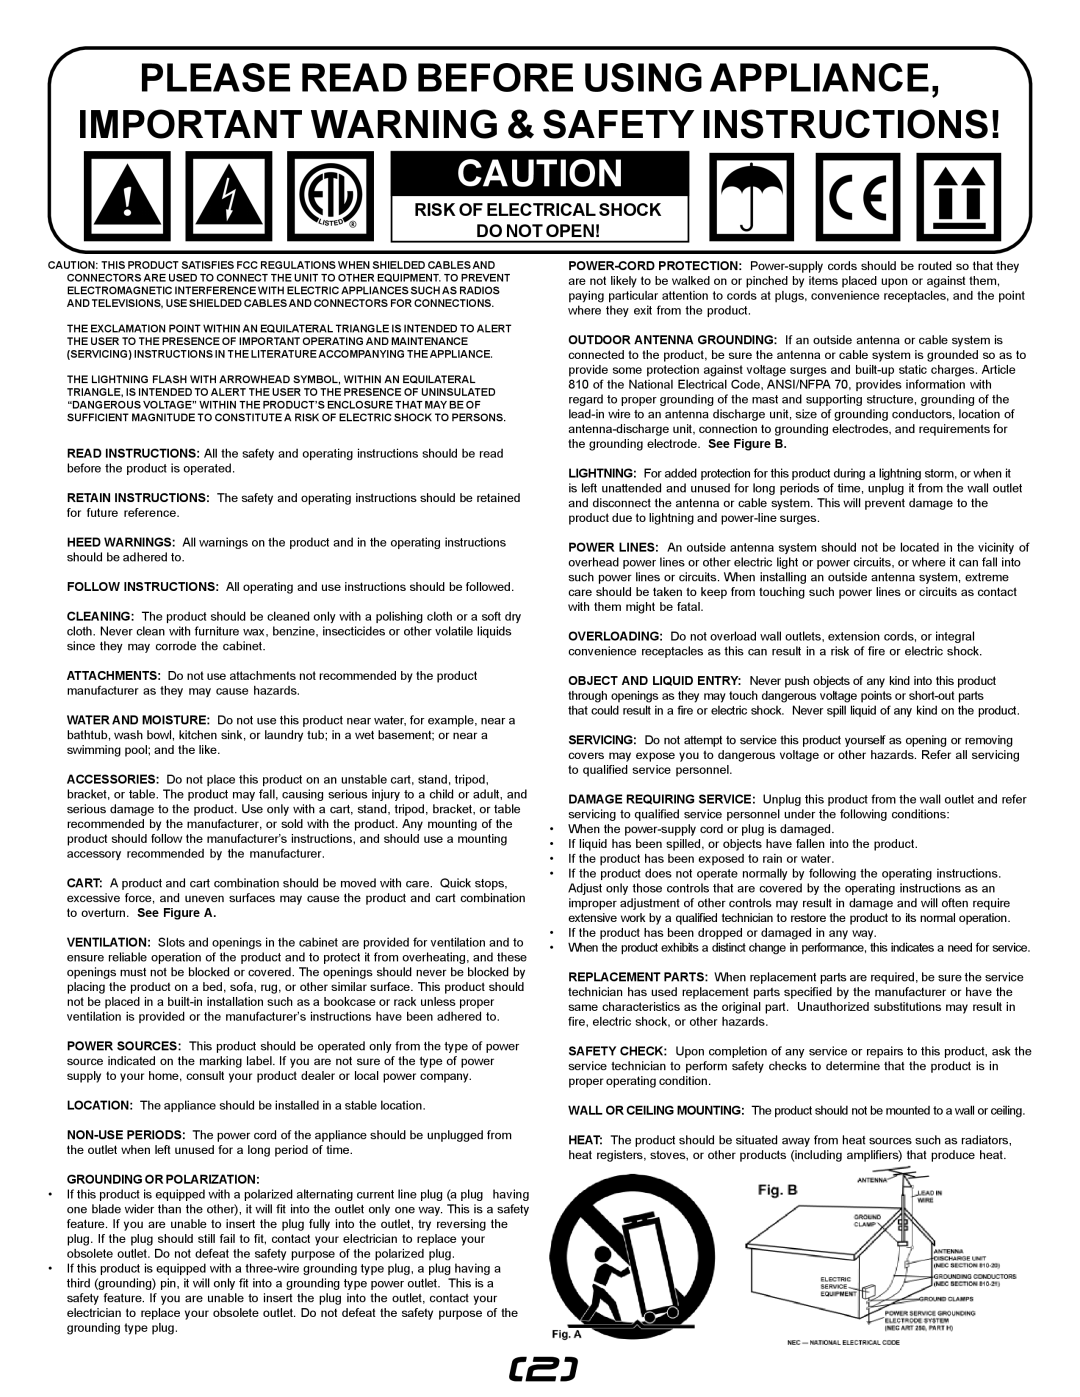 Gemini CDJ-01 manual Please Read Before Using Appliance, Important Warning & Safety Instructions, Grounding Or Polarization 